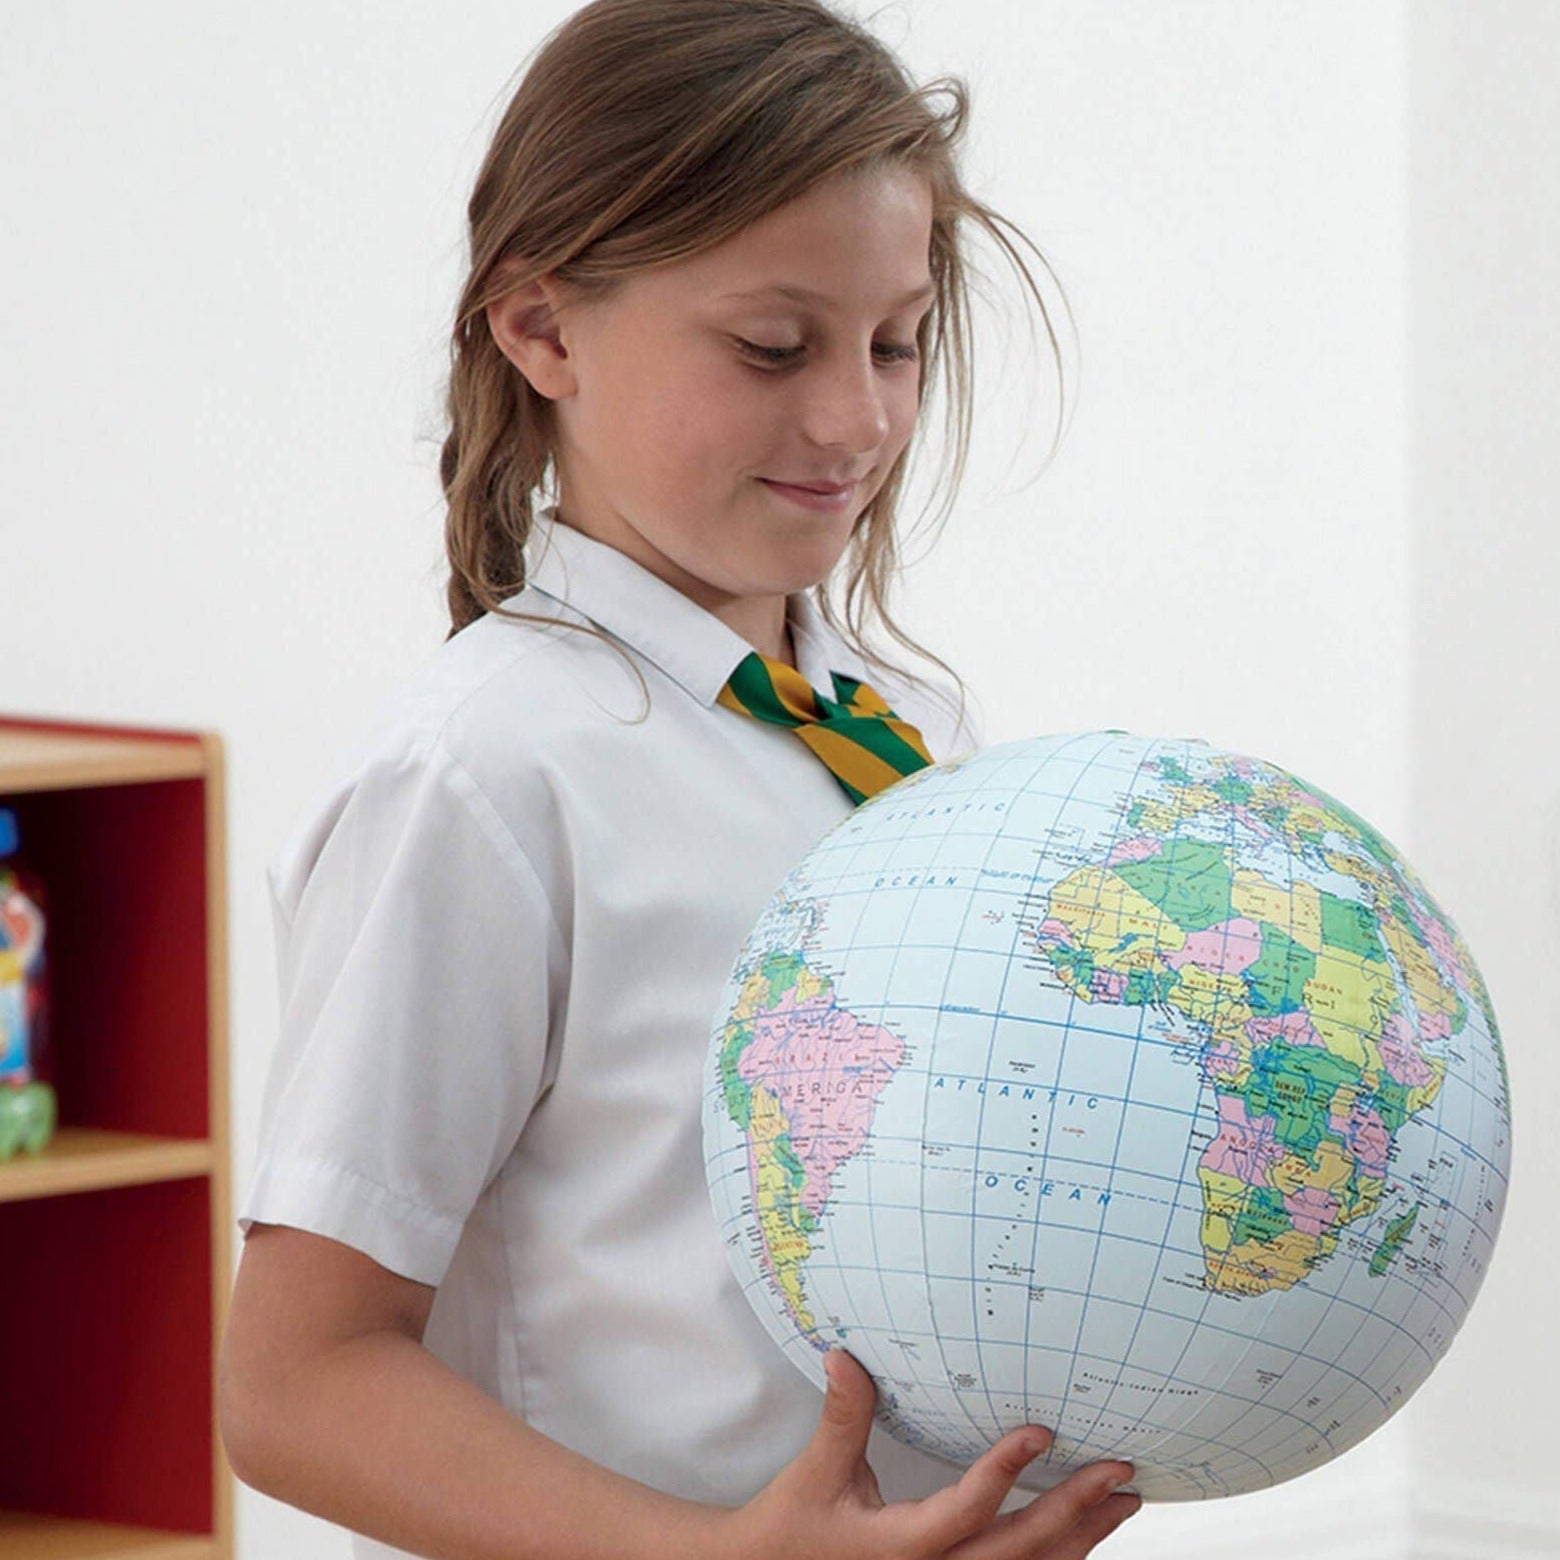 Inflatable Globe, Embrace the whole world with this quality, giant inflatable globe. The inflatable globe measures 40cm in diameter when inflated. Make a game of geography, and learn all about the earth as you play catch and develop vital motor skills.Great value globe which is a superb stimulus for the whole class or even in small groups. Great for use with the whole class for classroom or playground games. Identify continents, countries, capitals and oceans with every toss of the ball. Great fun at home o